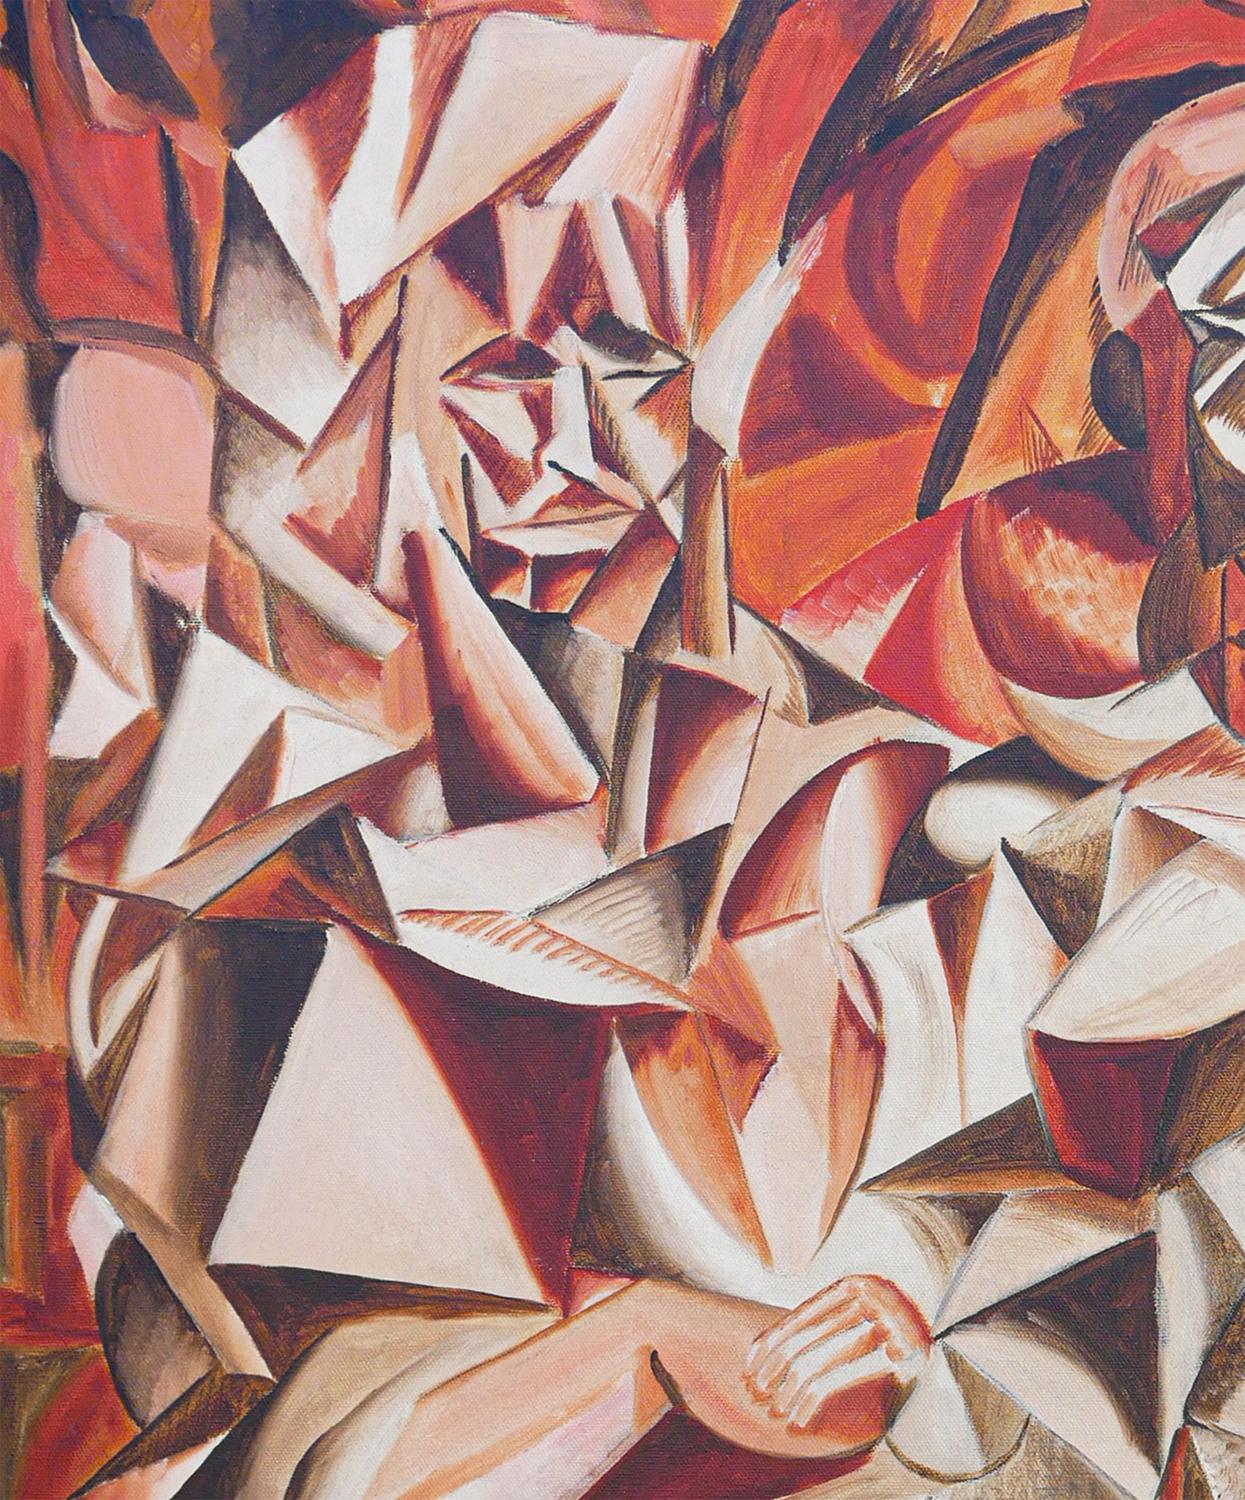 “Dienstag” Orange, Red, and Brown Abstract Cubist Figurative Painting 7